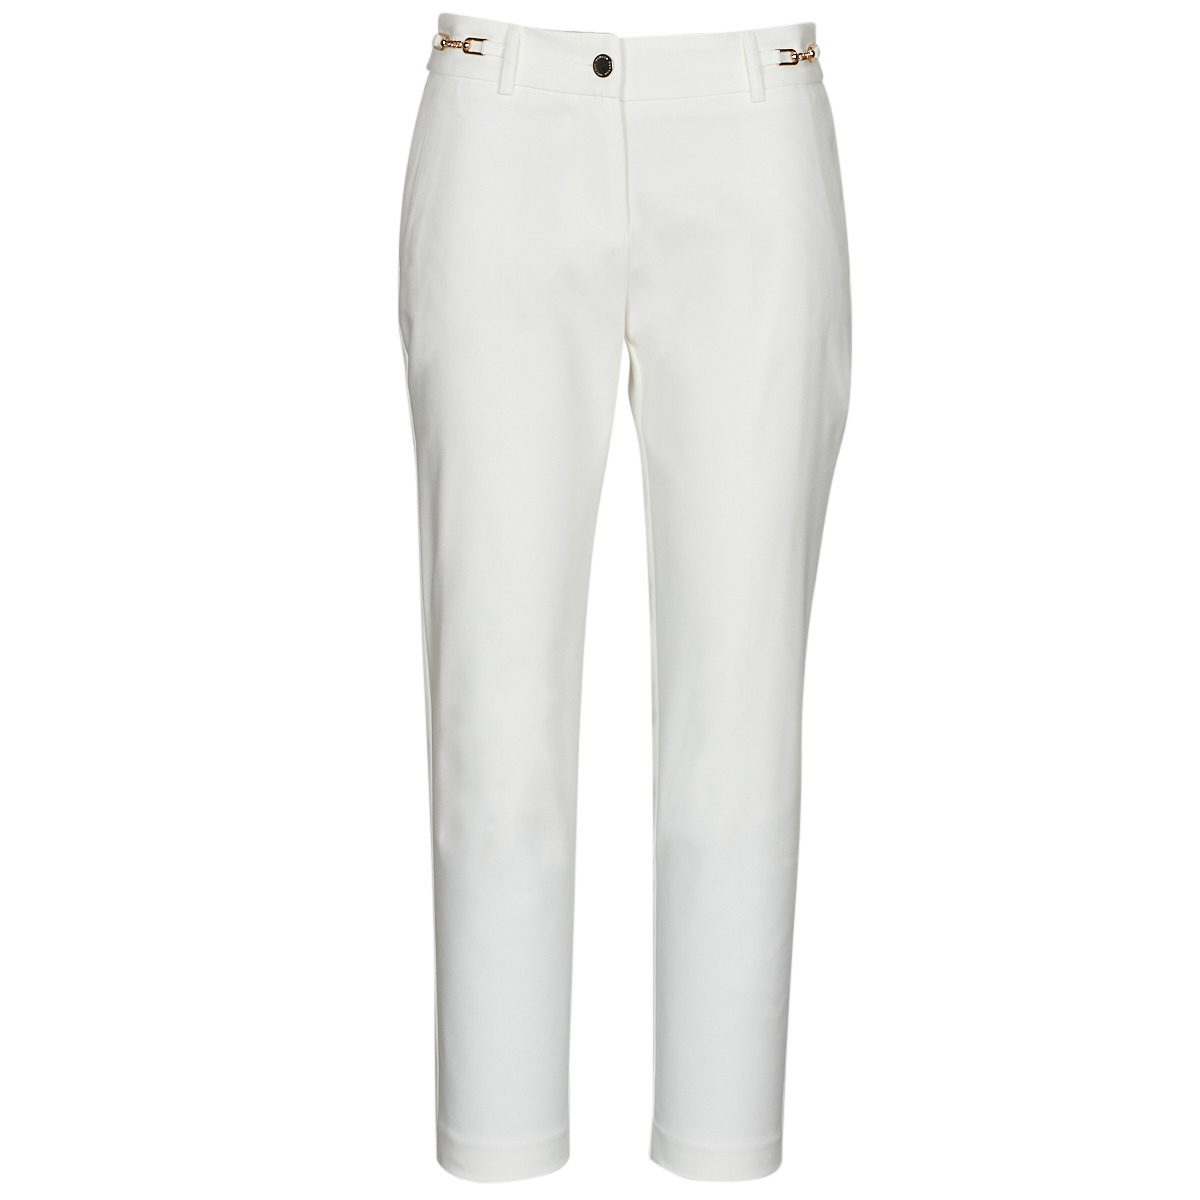 Morgan - Lady Trousers in White by Spartoo GOOFASH